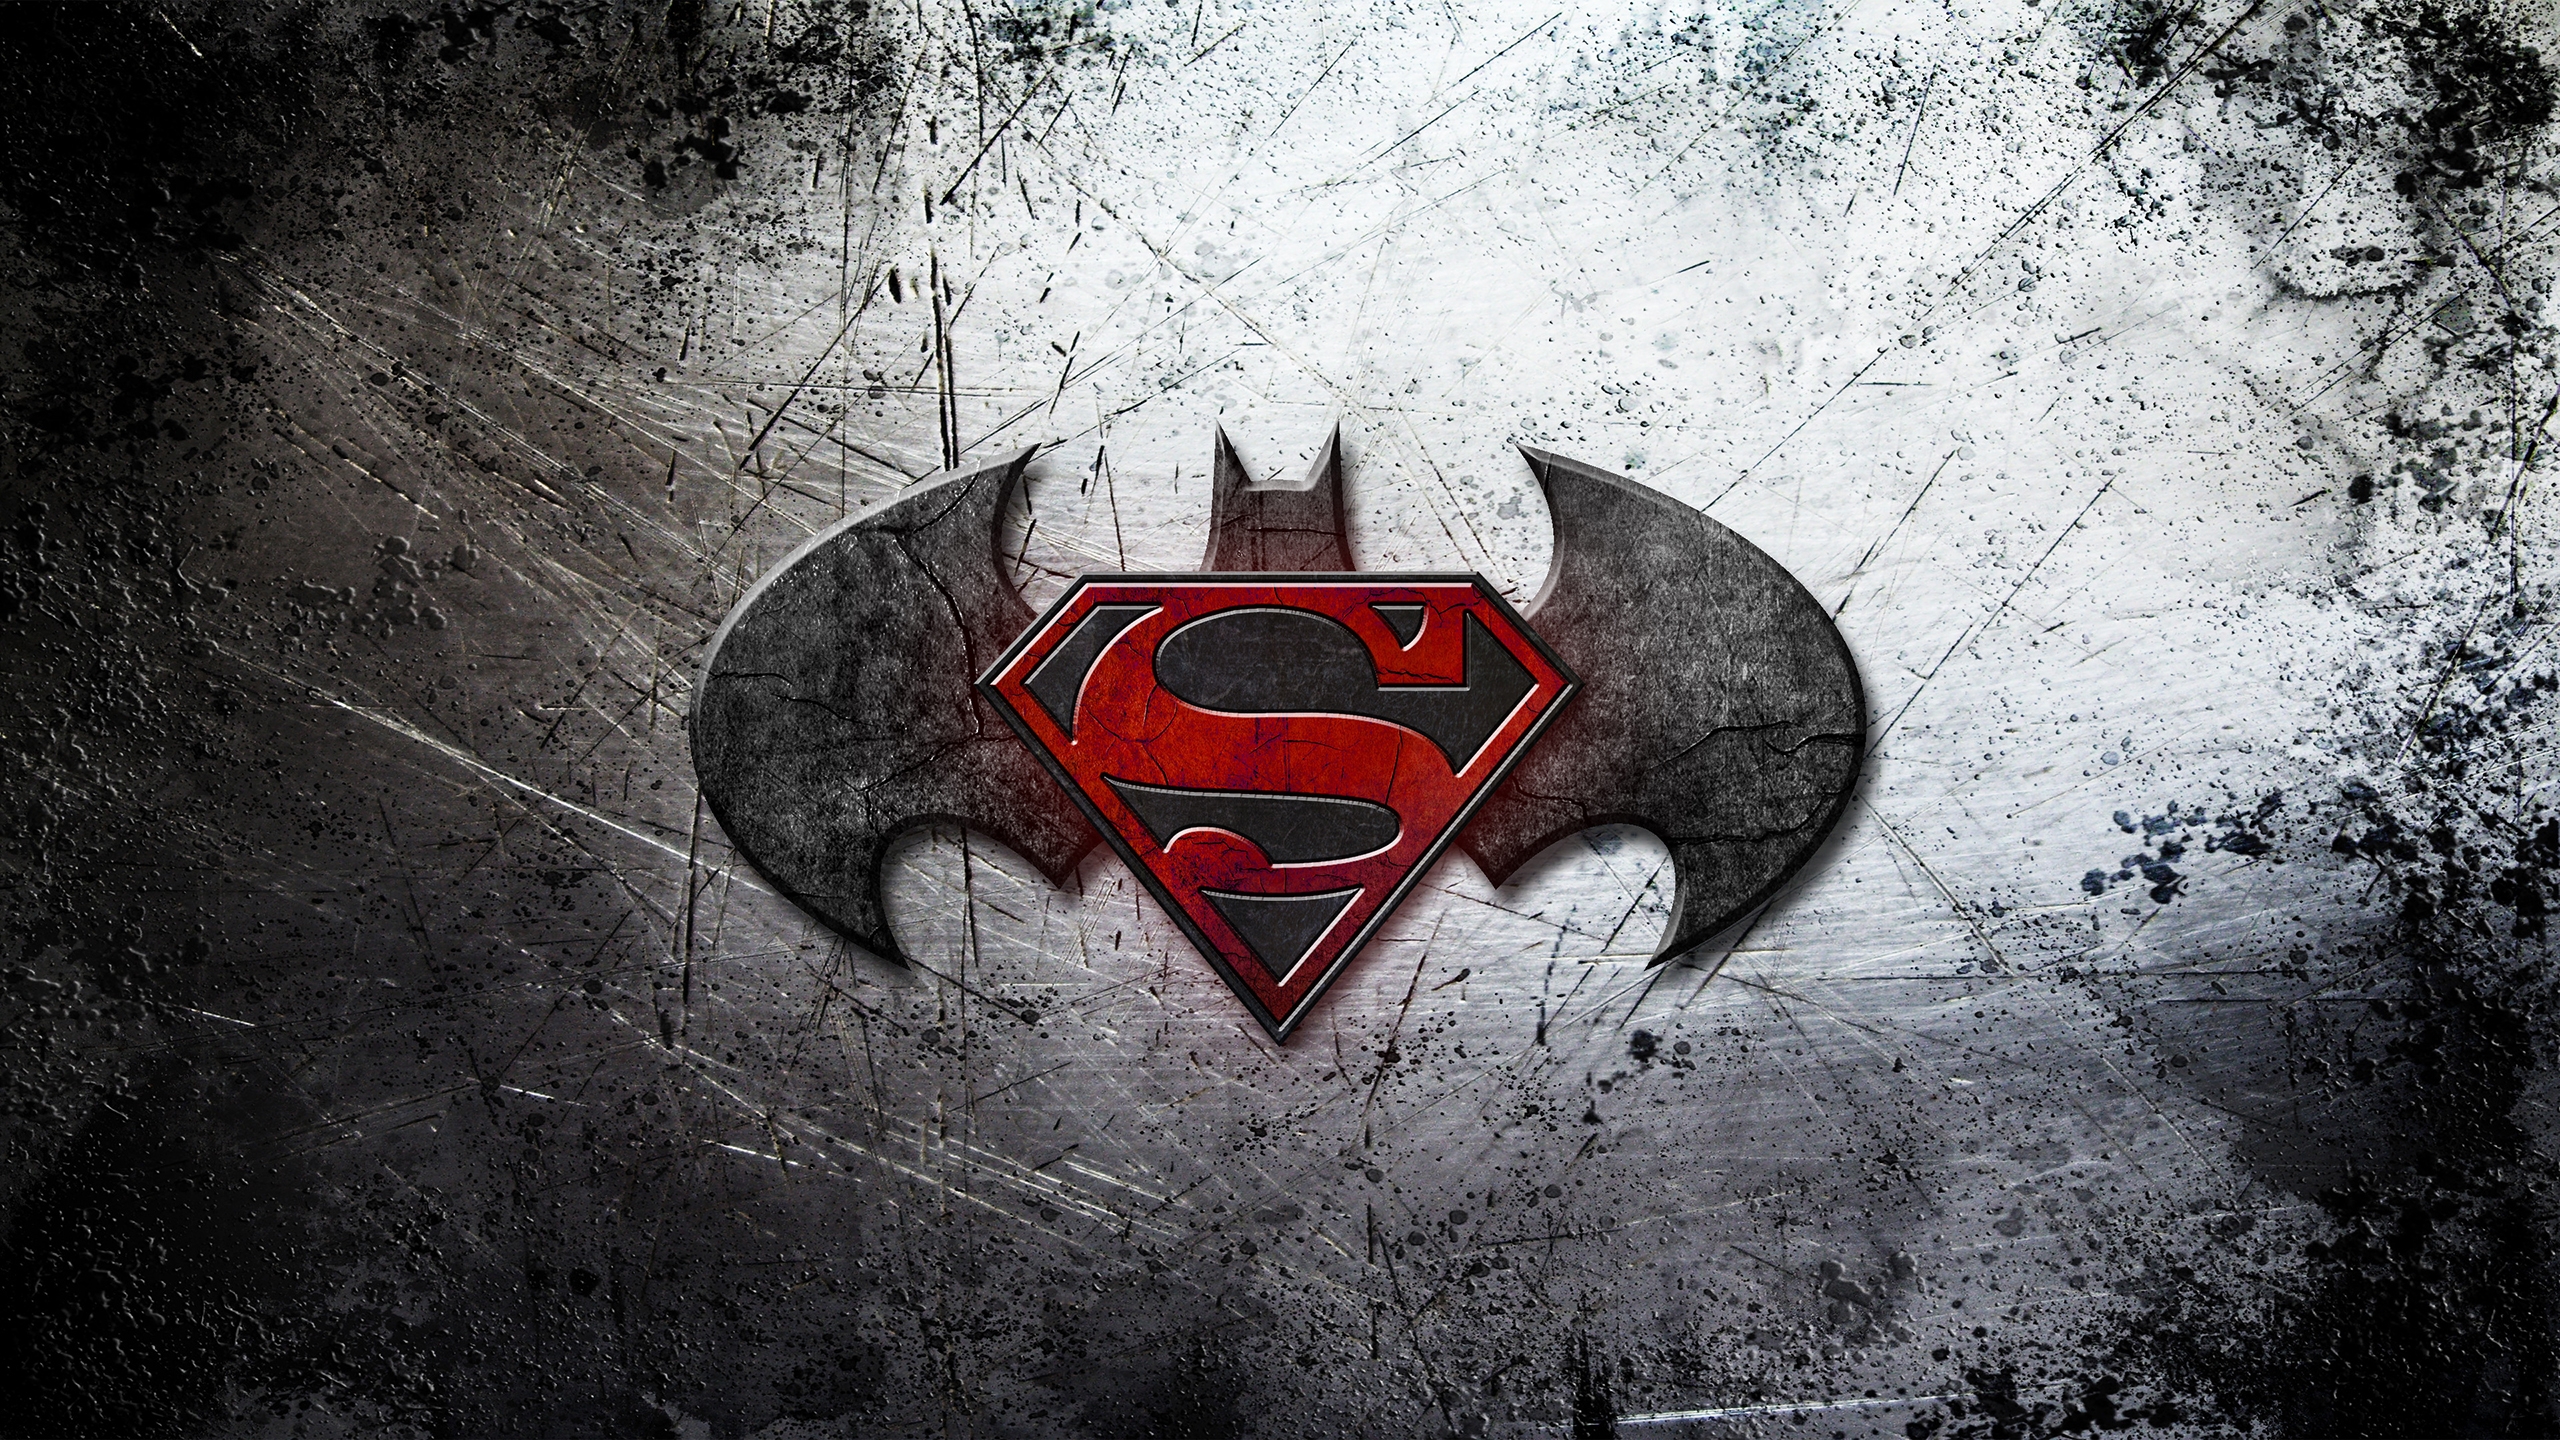 Batman And Superman Logo Image Amp Pictures Becuo